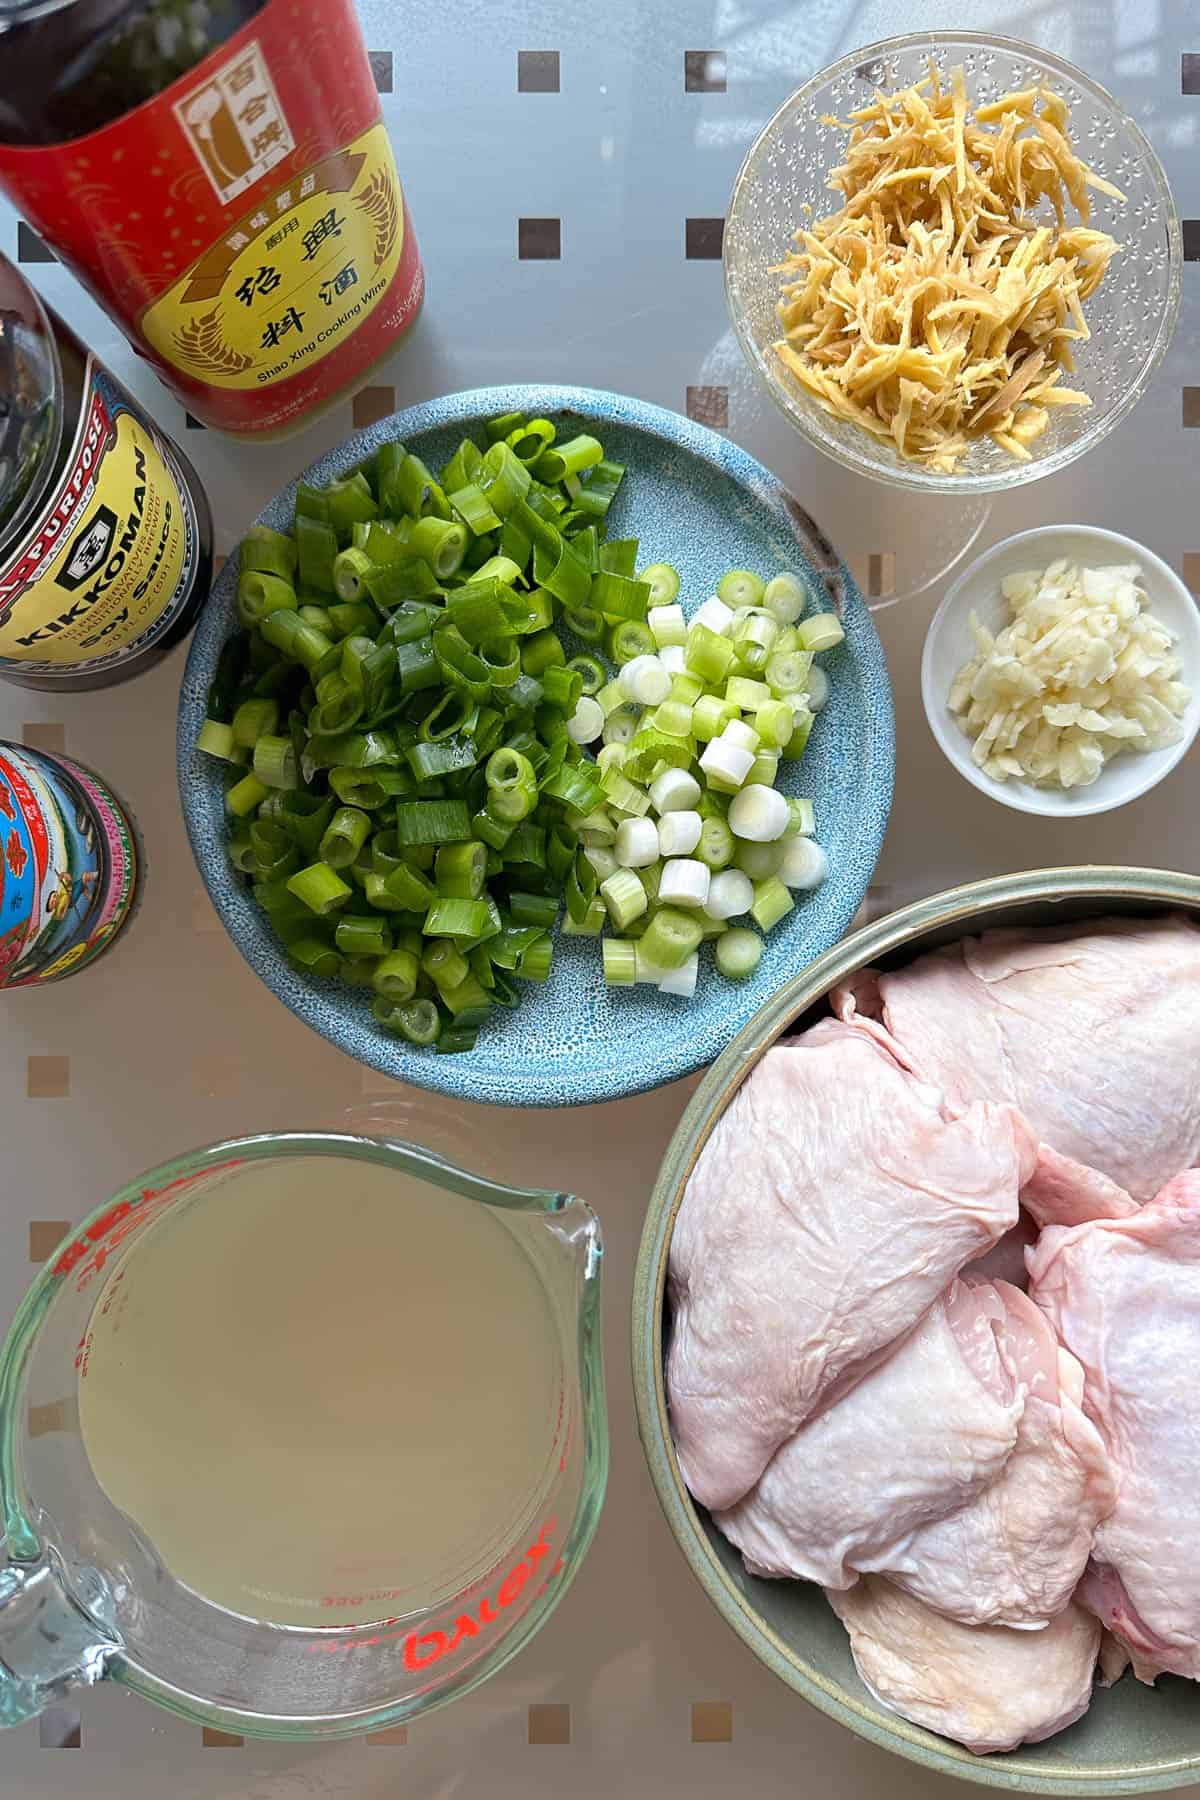 Ingredients for oyster sauce chicken laid out on a table (chicken thighs, chicken broth, green onion, ginger, garlic, oyster sauce, Shaoxing wine, and soy sauce).